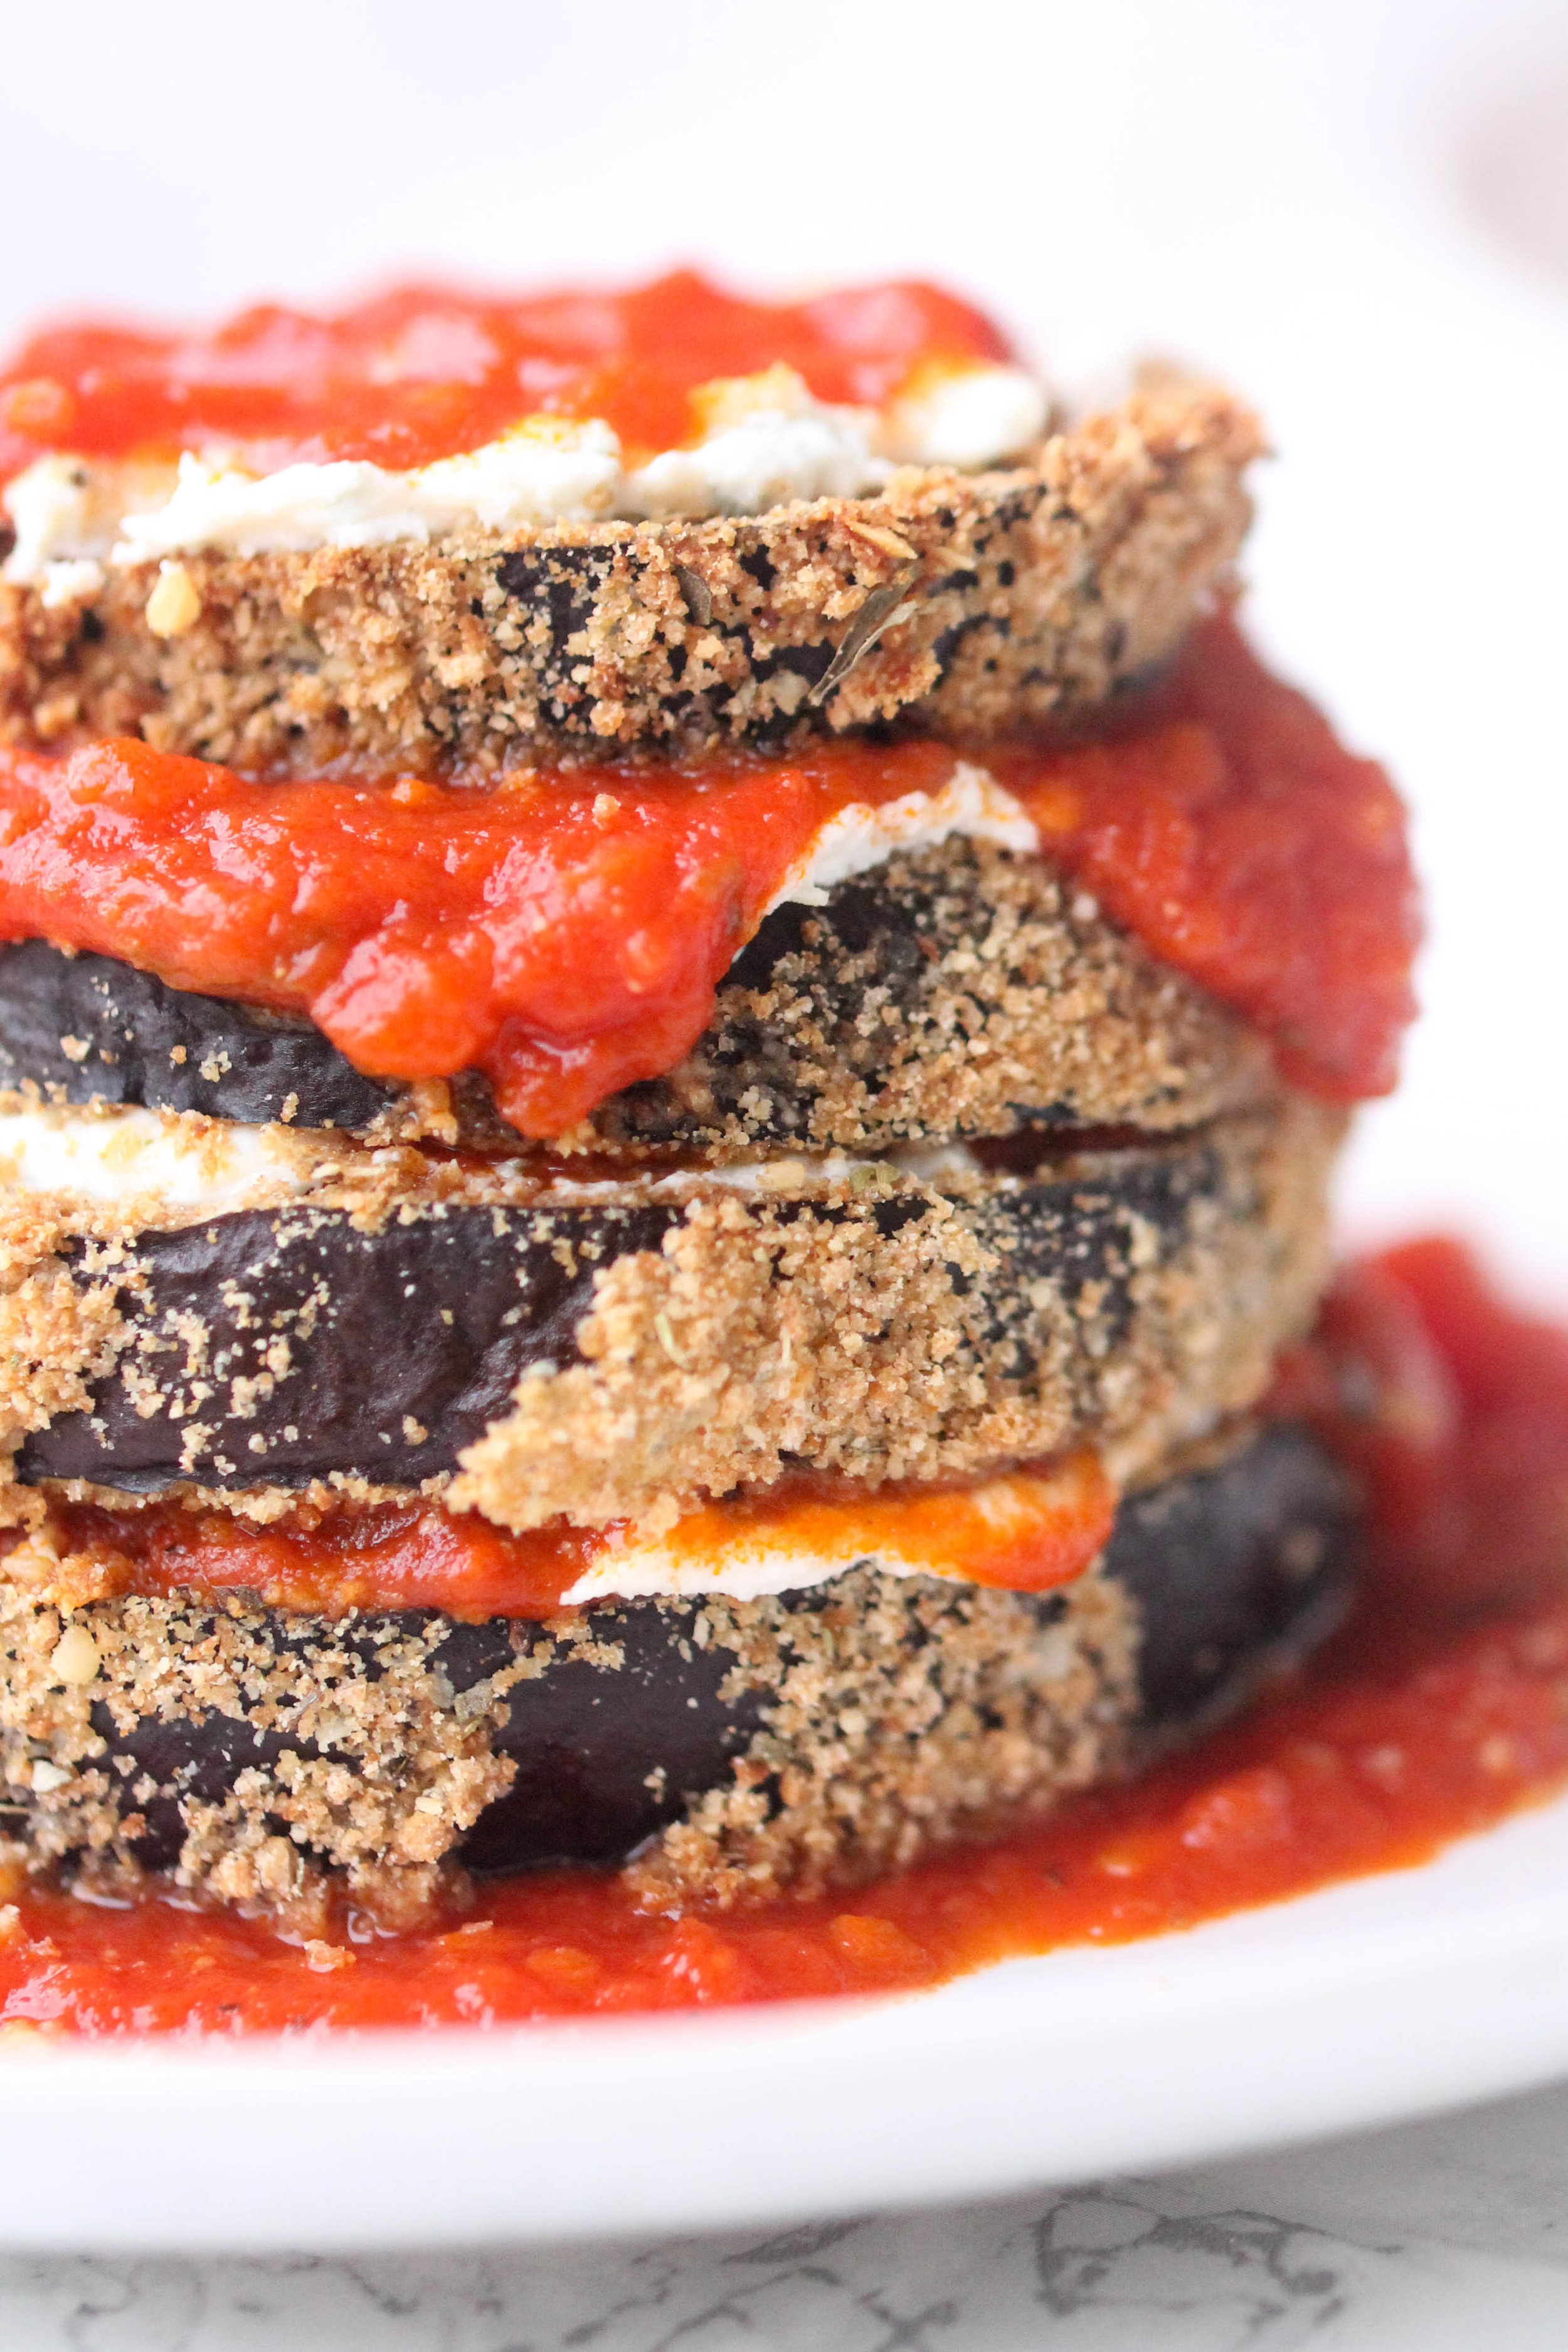 Eggplant Parmesan Stacks vegetarian alternative to chicken parmesan and healthier than your deep-fried eggplant parm.